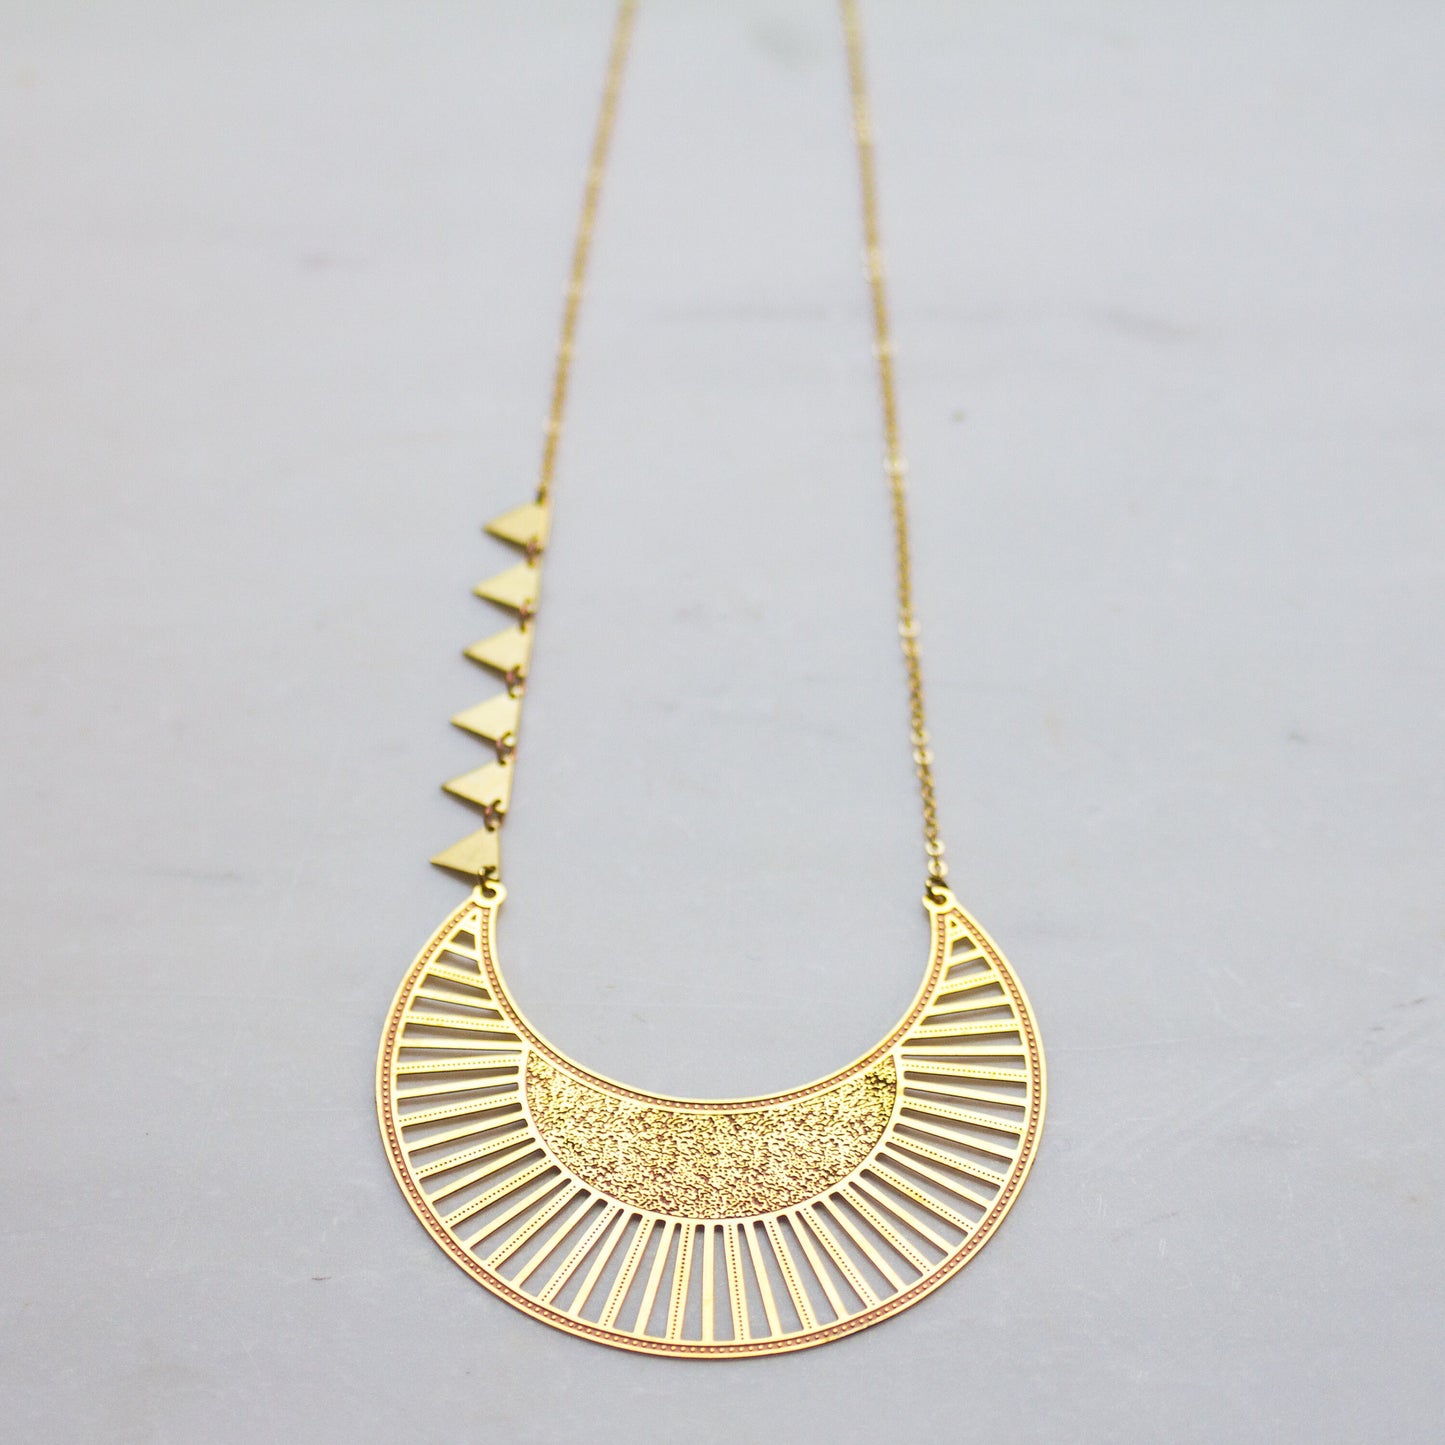 Crescent Moon Necklace, ethnic jewelry, statement necklace, boho necklace, gold moon necklace, unique gift for her, gold triangle necklace